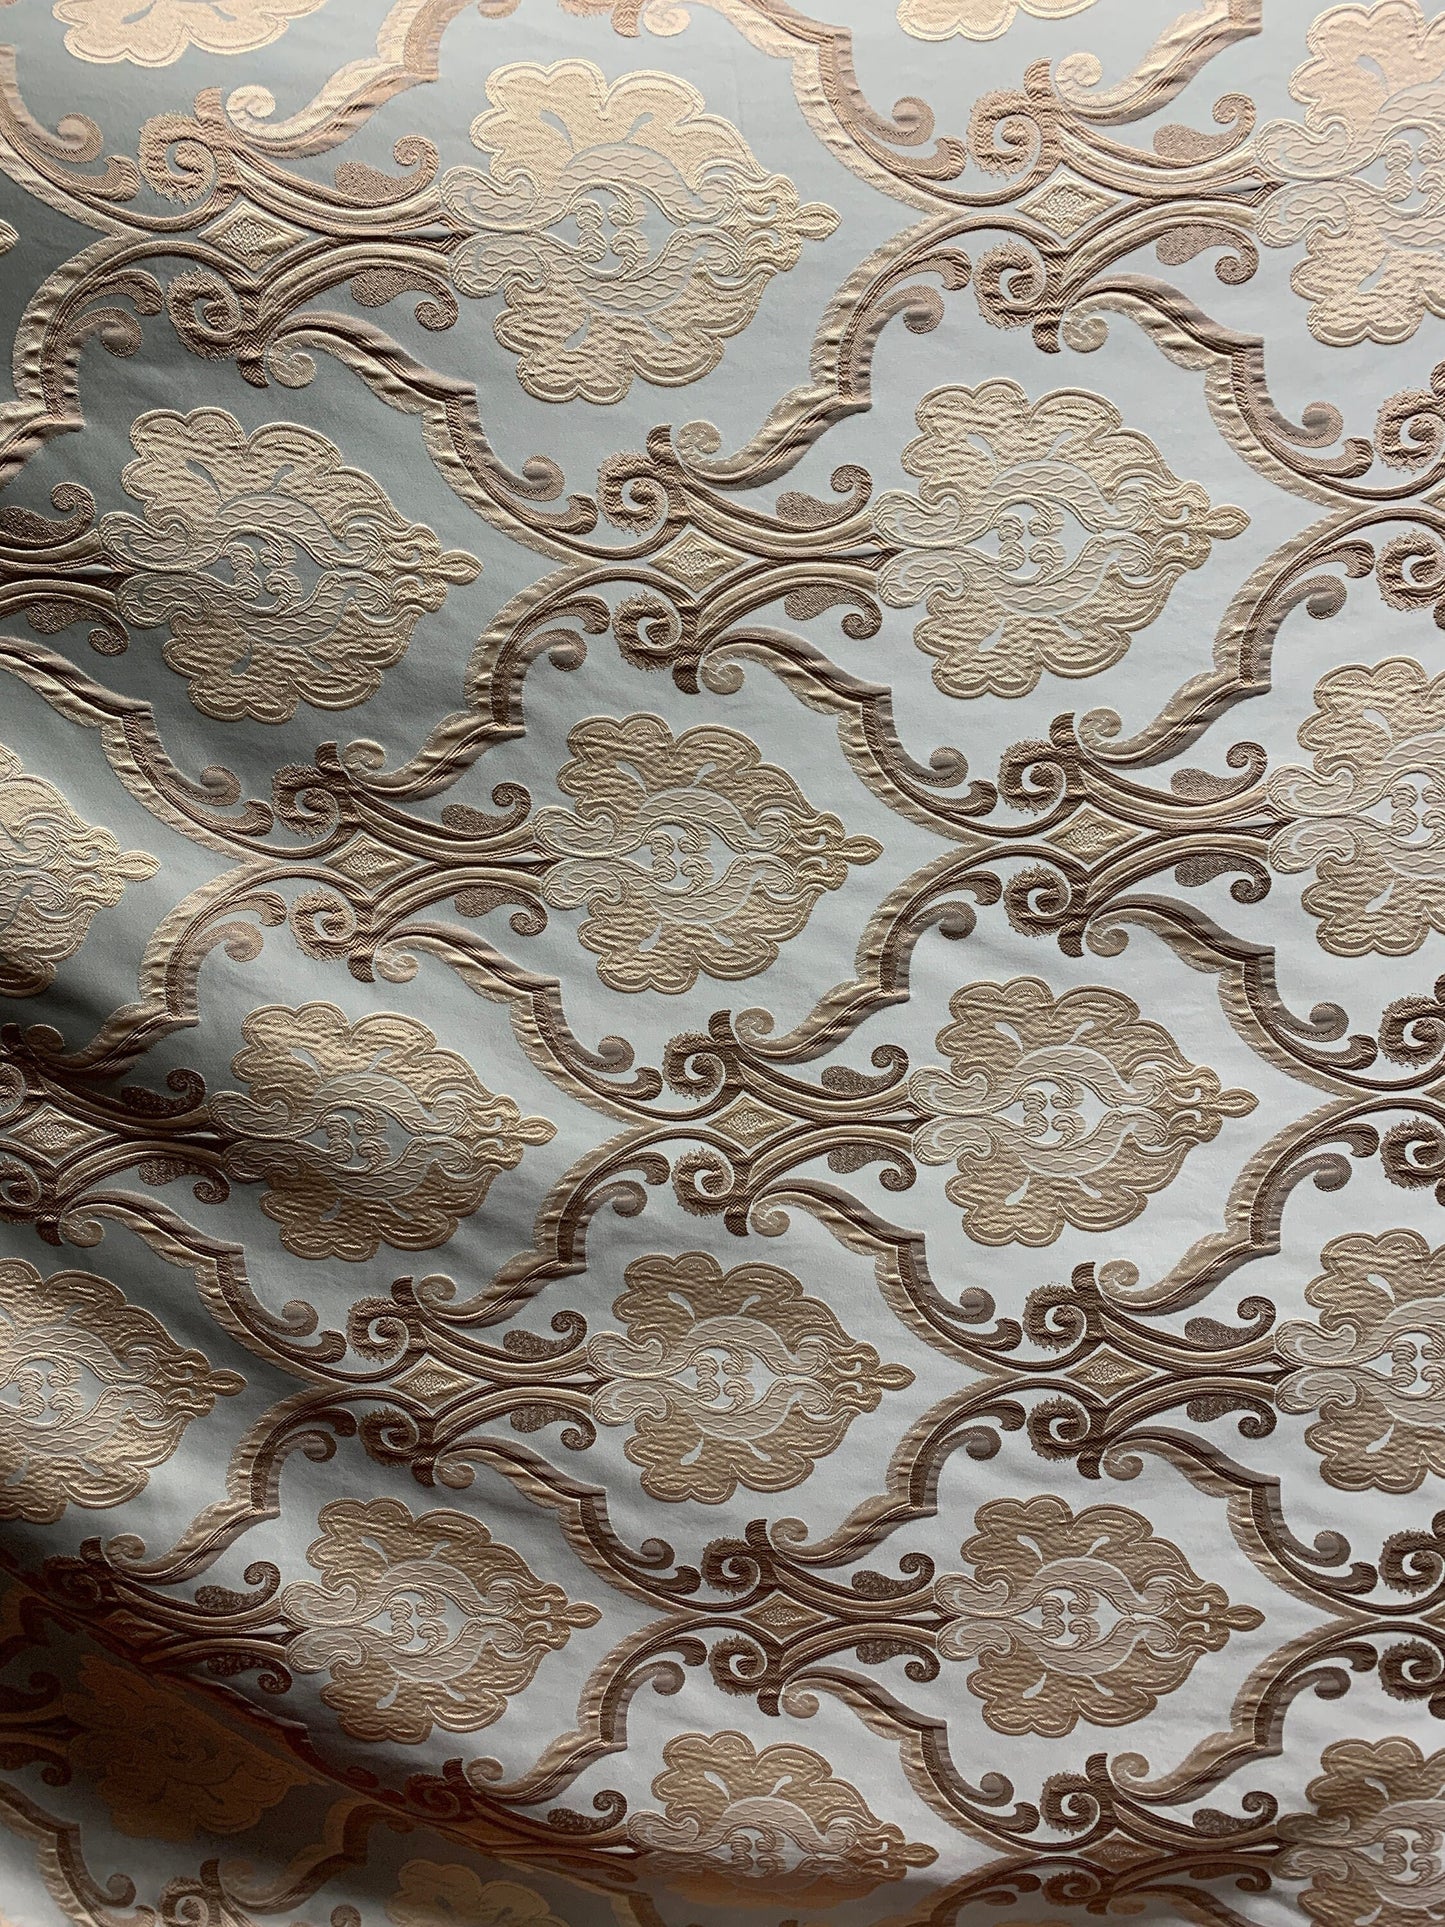 LIGHT SAGE TAUPE Damask Brocade Upholstery Drapery Fabric (54 in.) Sold By The Yard